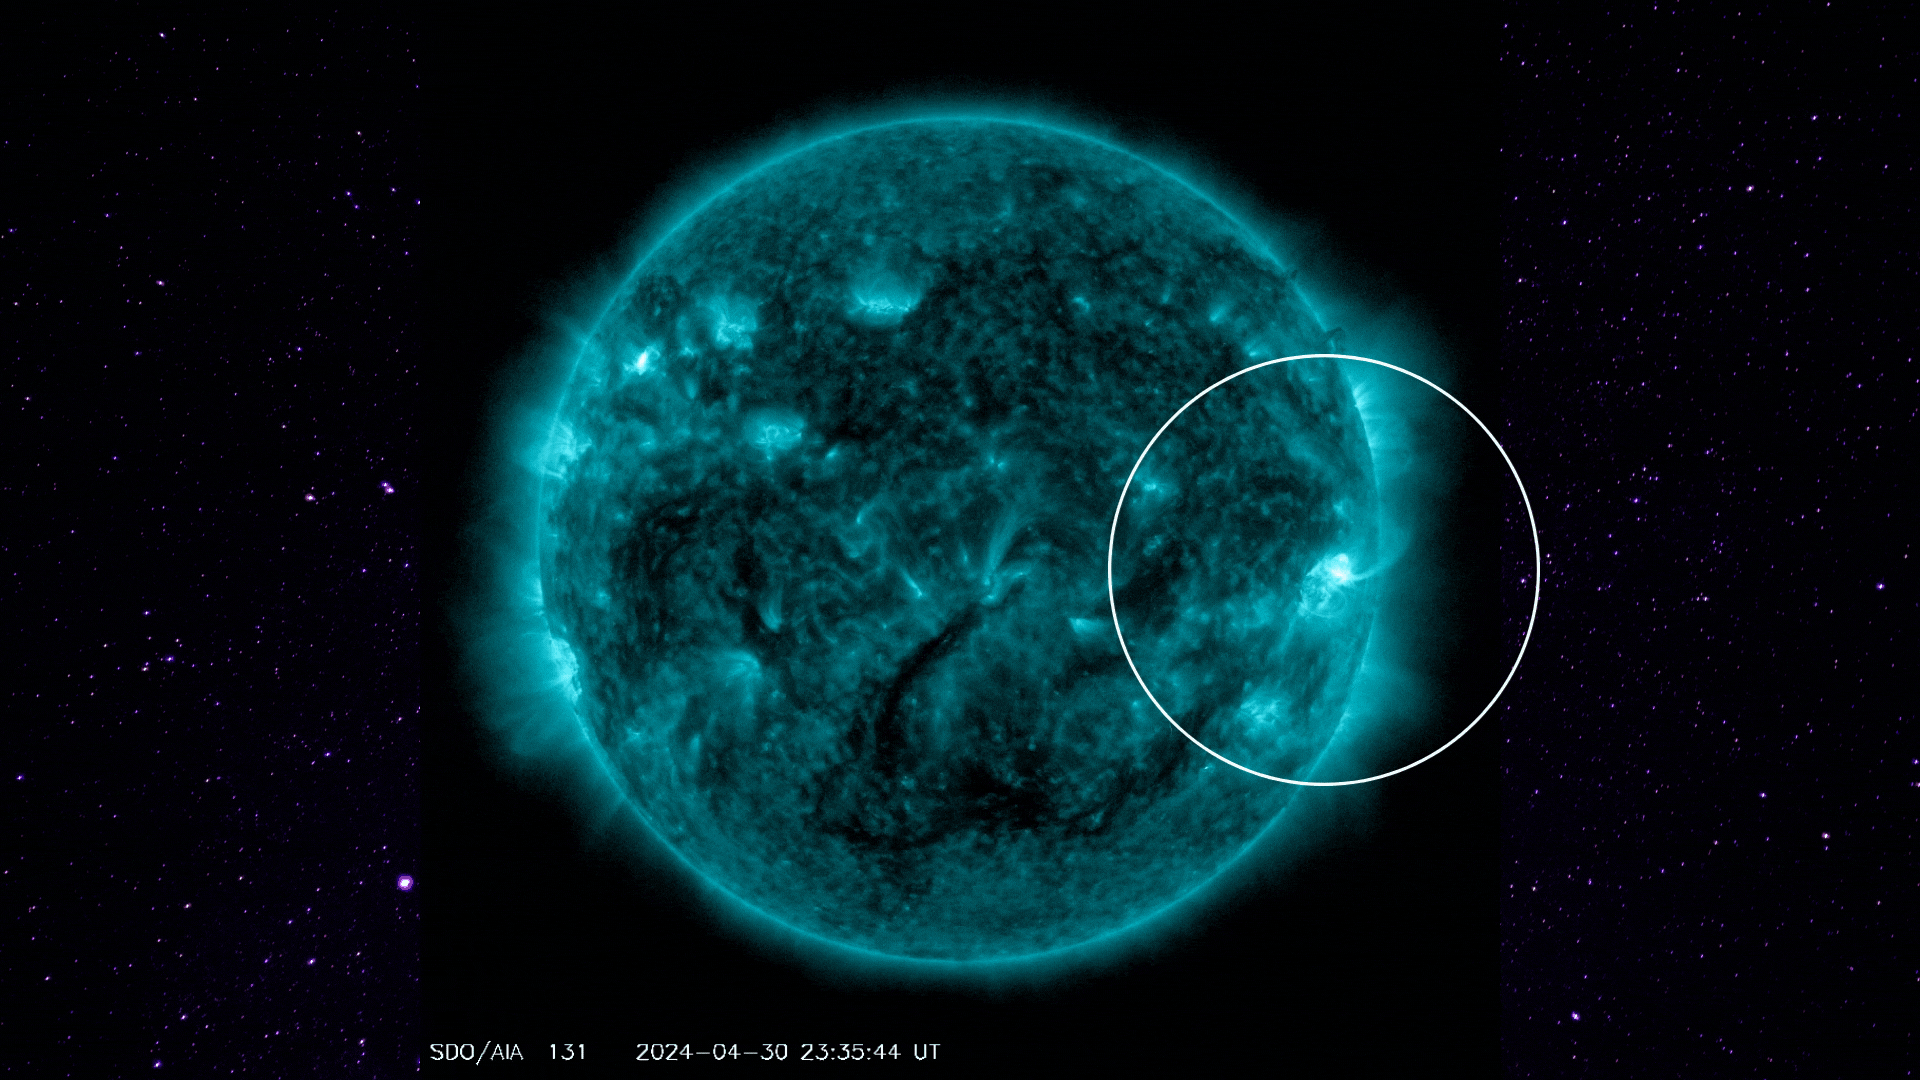 Sun unleashes near X-class solar flare: M9.5 eruption sparks radio blackouts across the Pacific Space